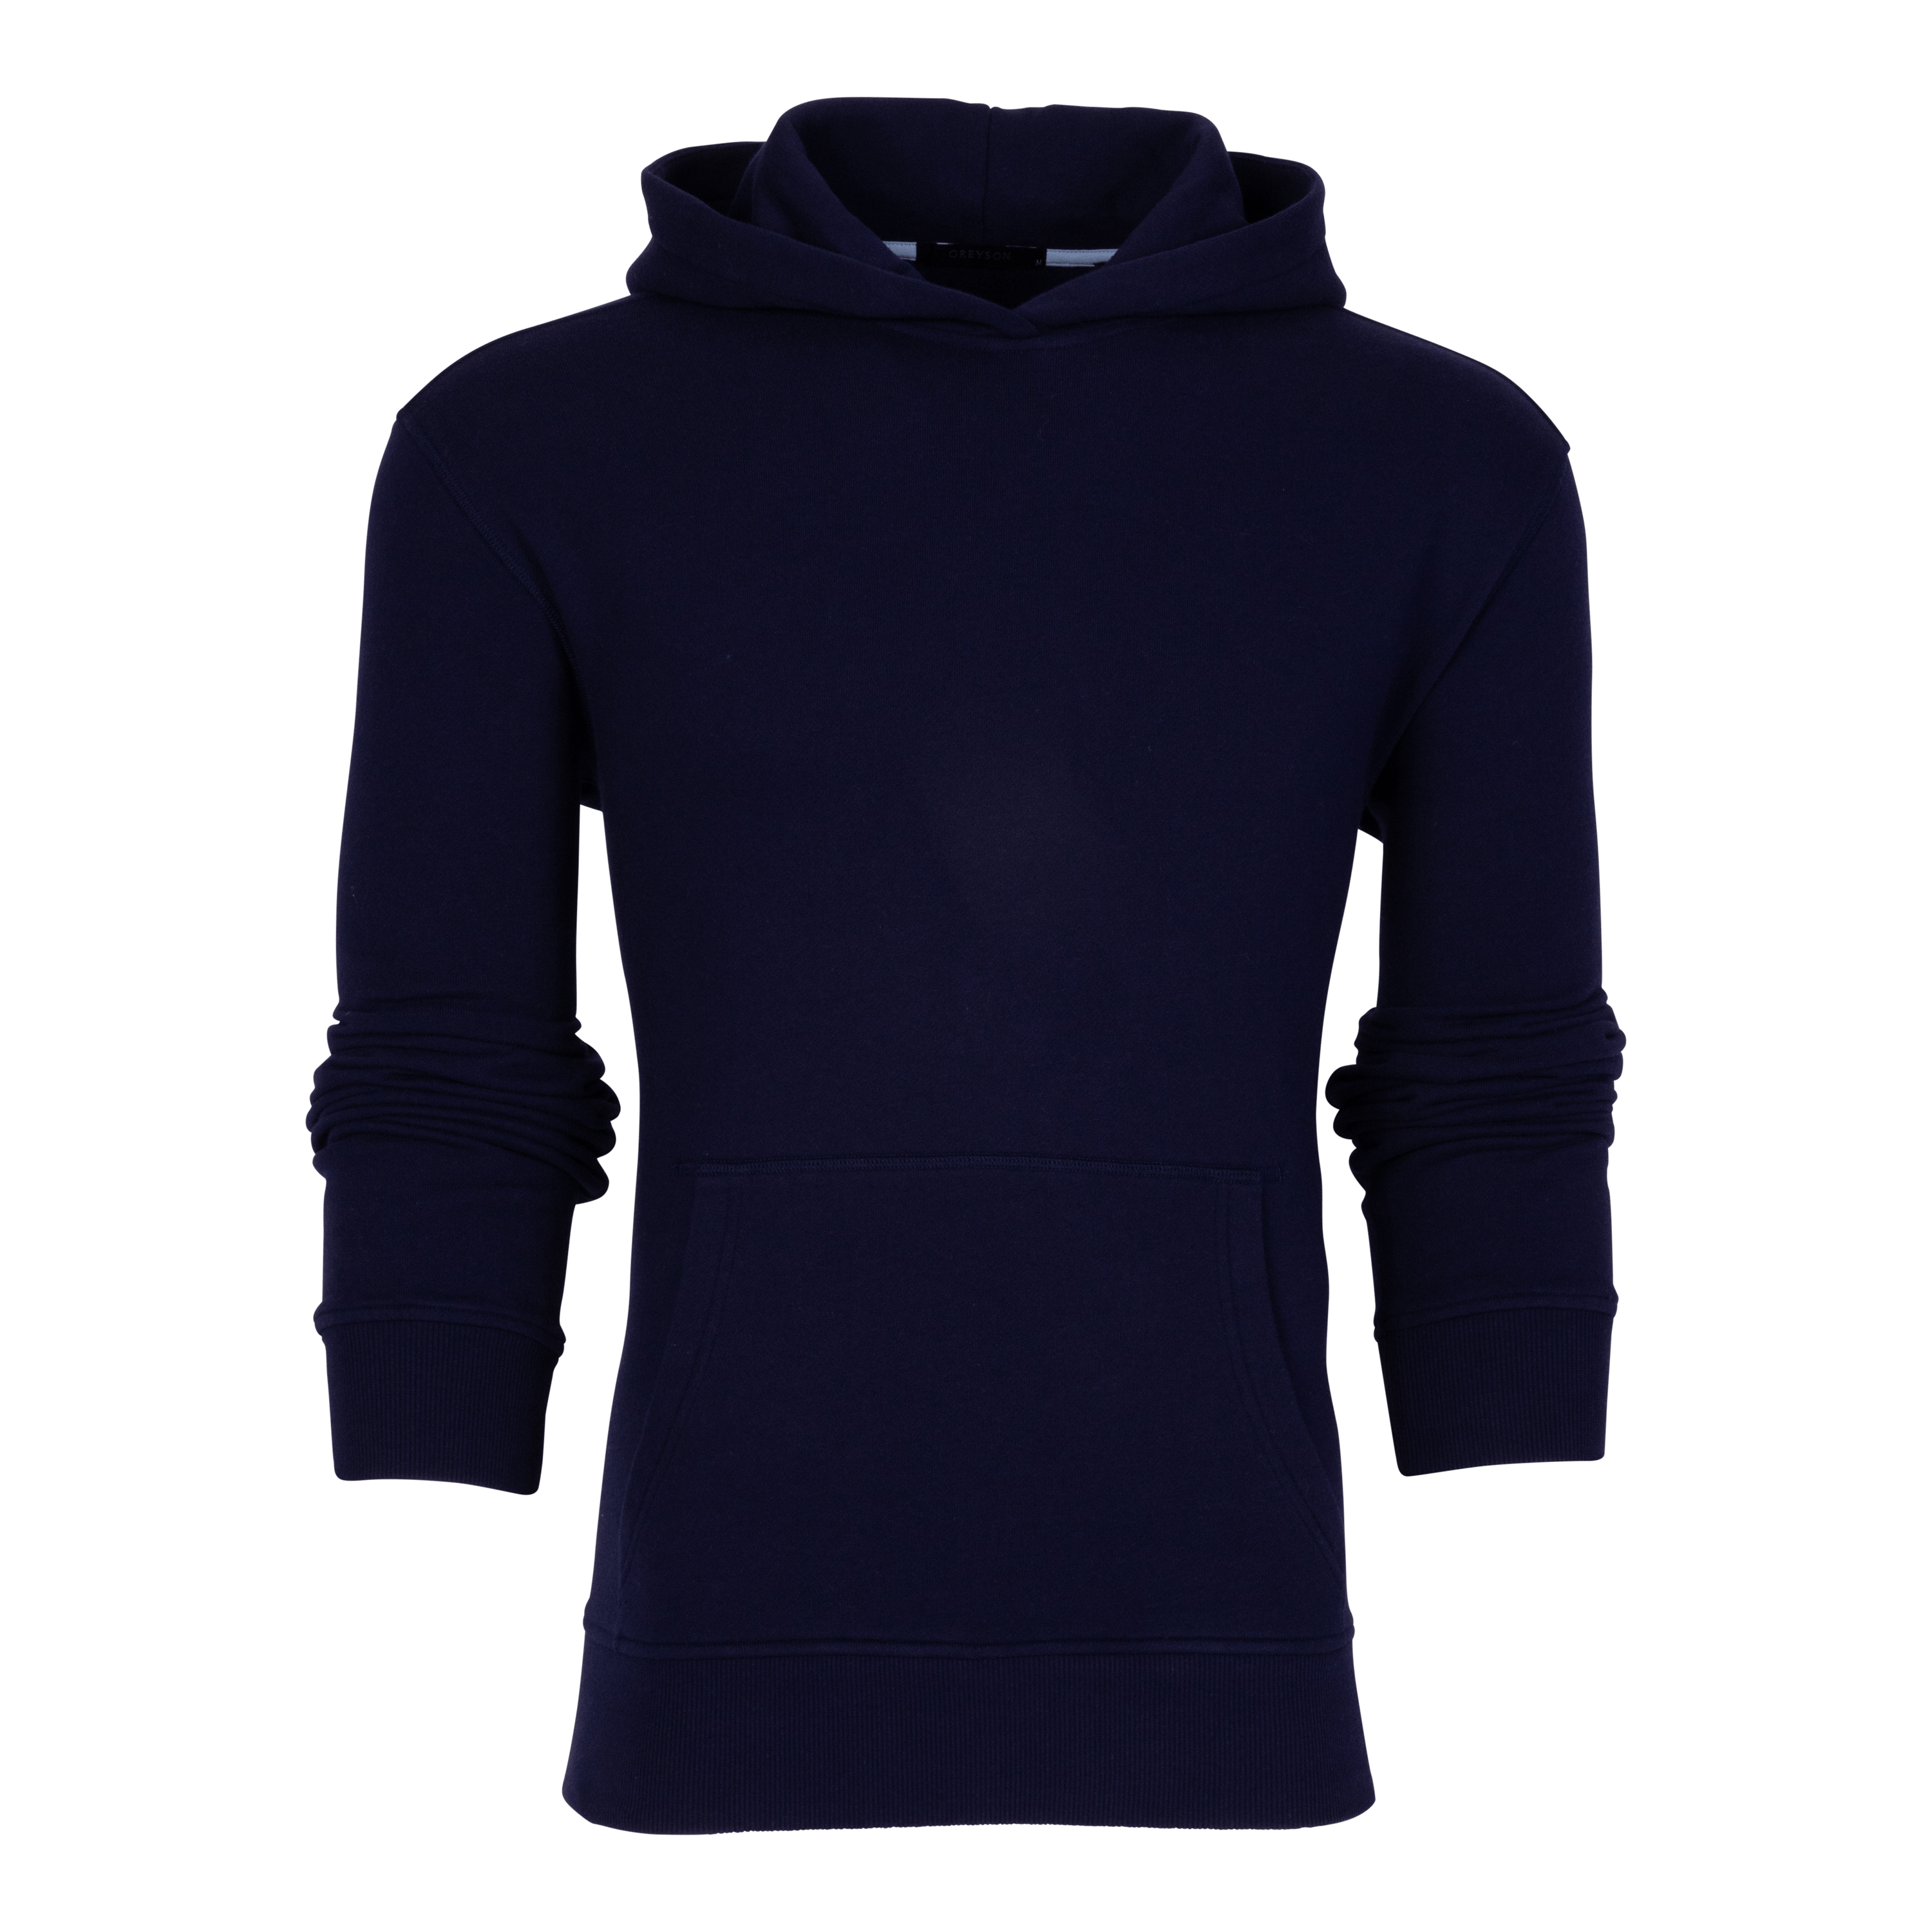 Lake Fleece Hoodie from Greysonclothiers Product Image